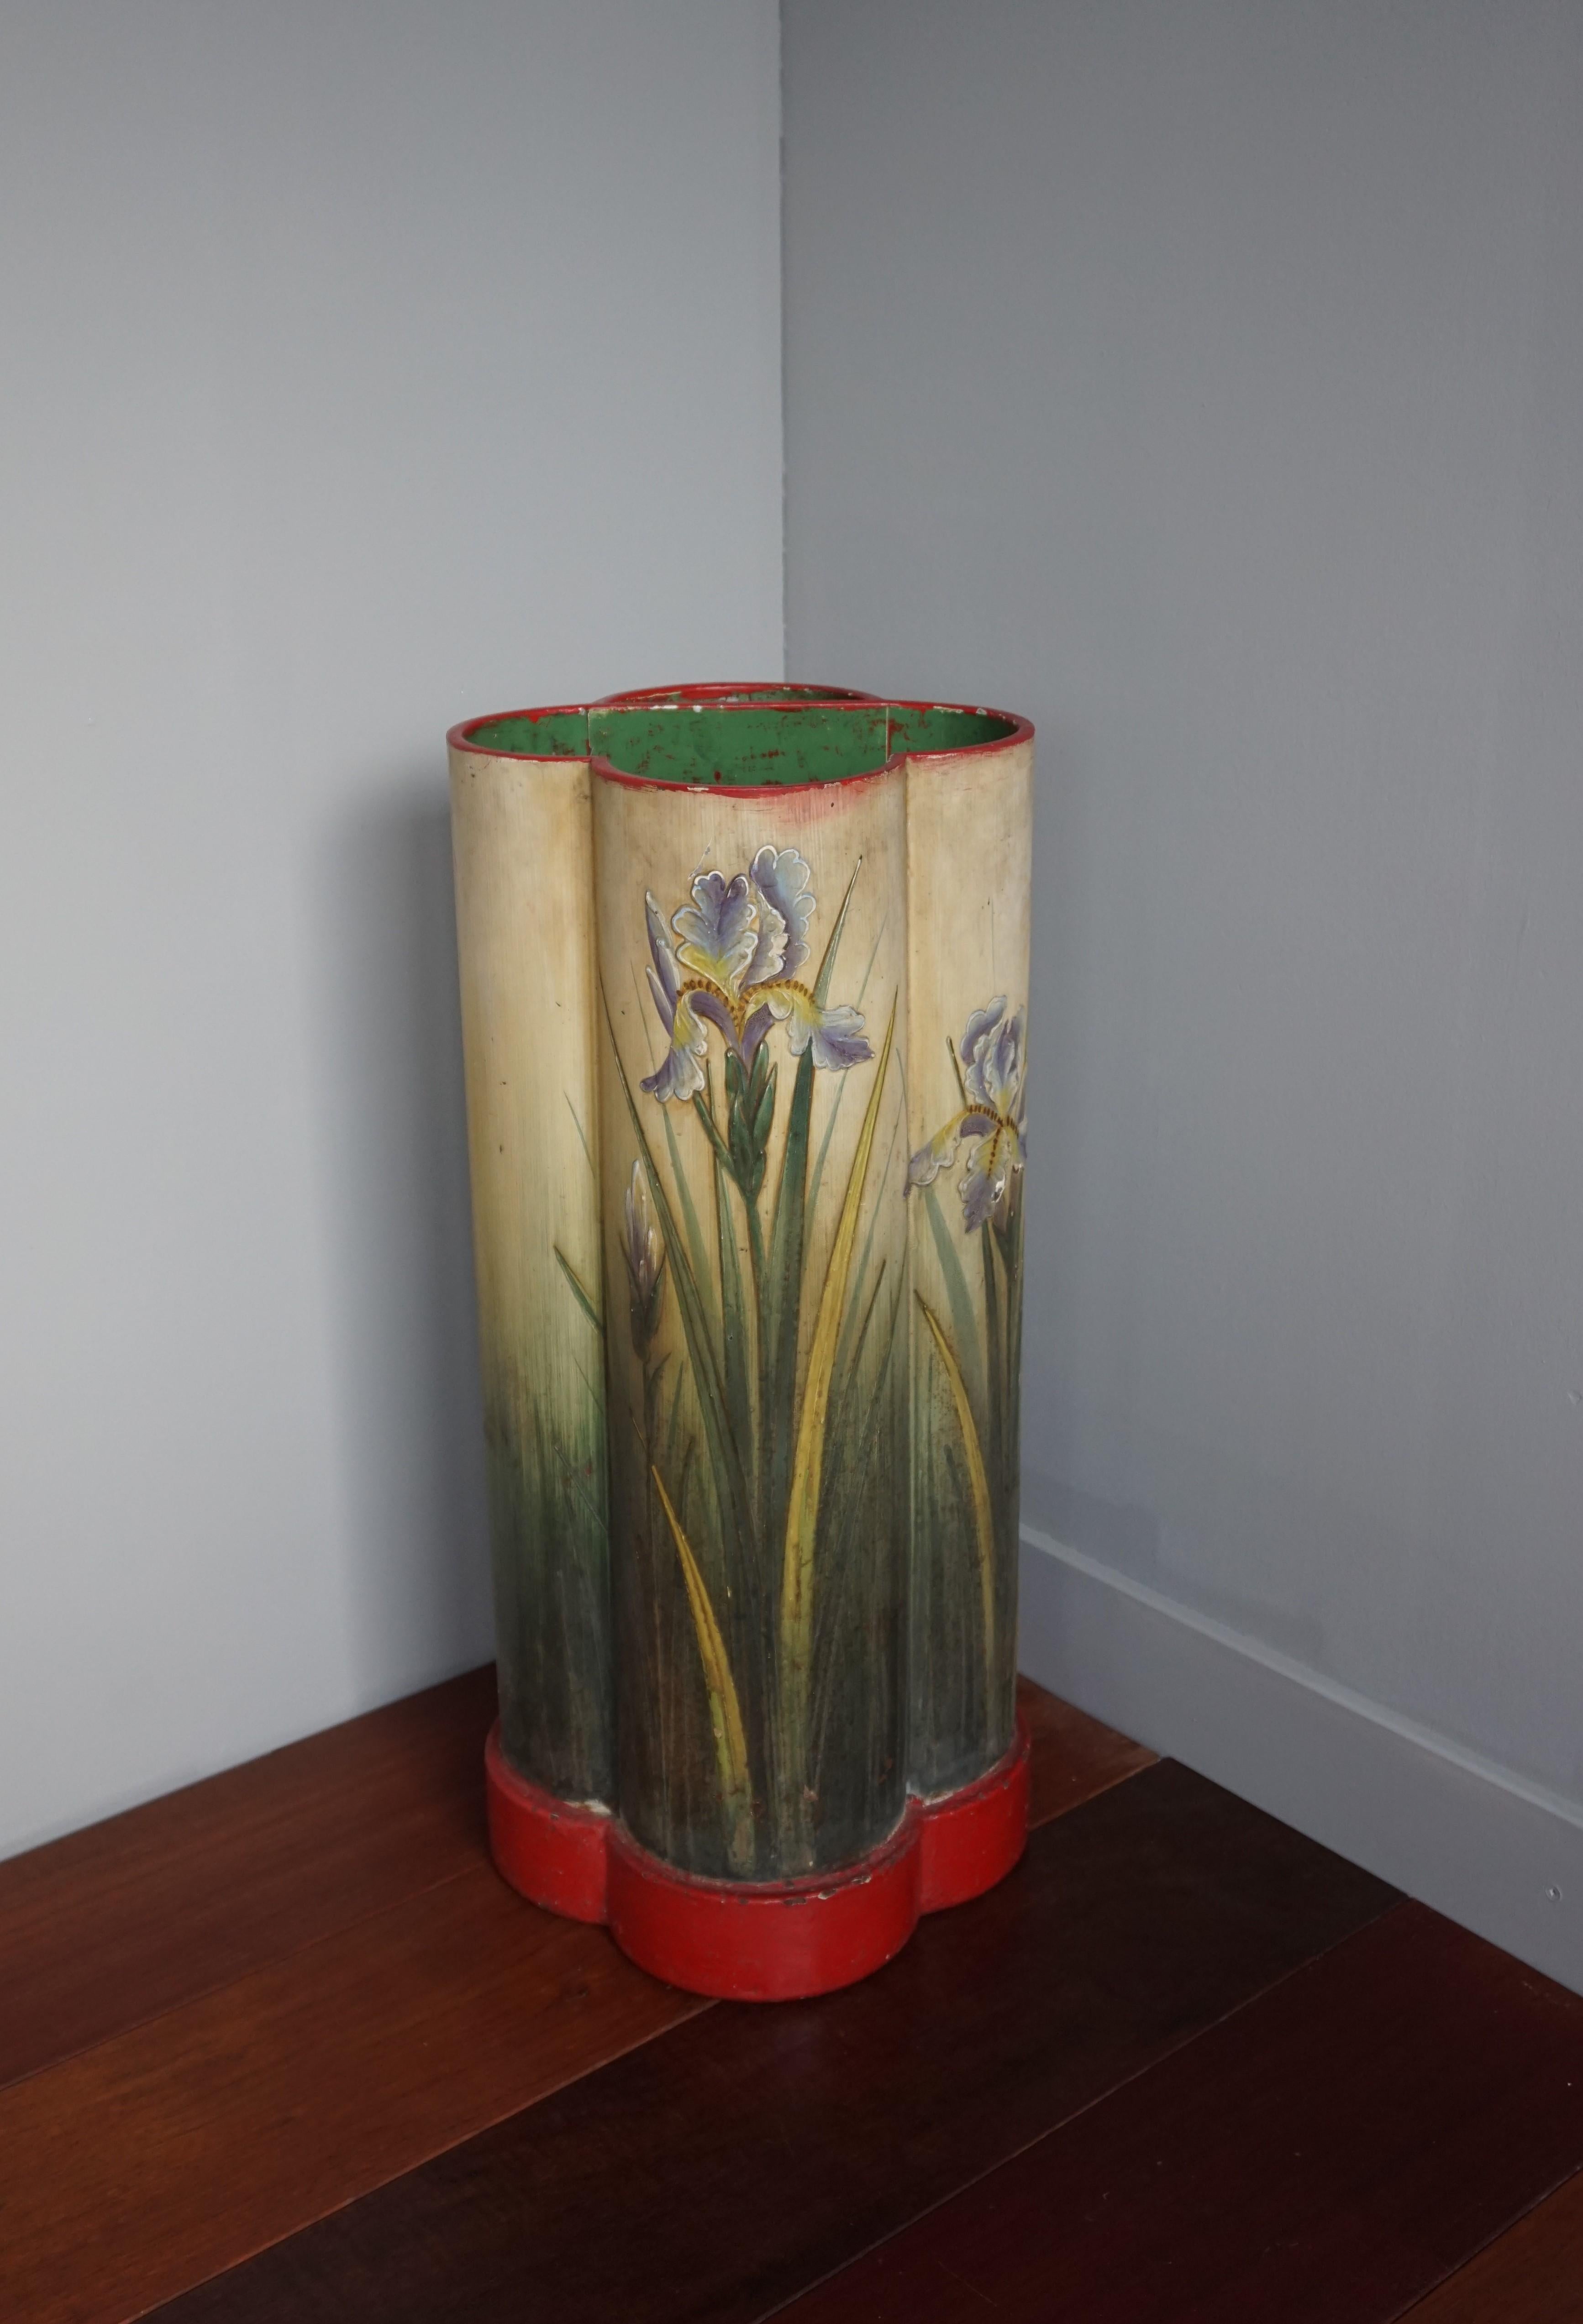 A fine work of Gothic Art depicting iris flowers, associated with the Passion of Christ and the Resurrection.

This Gothic quatrefoil design umbrella stand is another one of our recent, unique finds. All handmade around 1900-1915 this weighty and